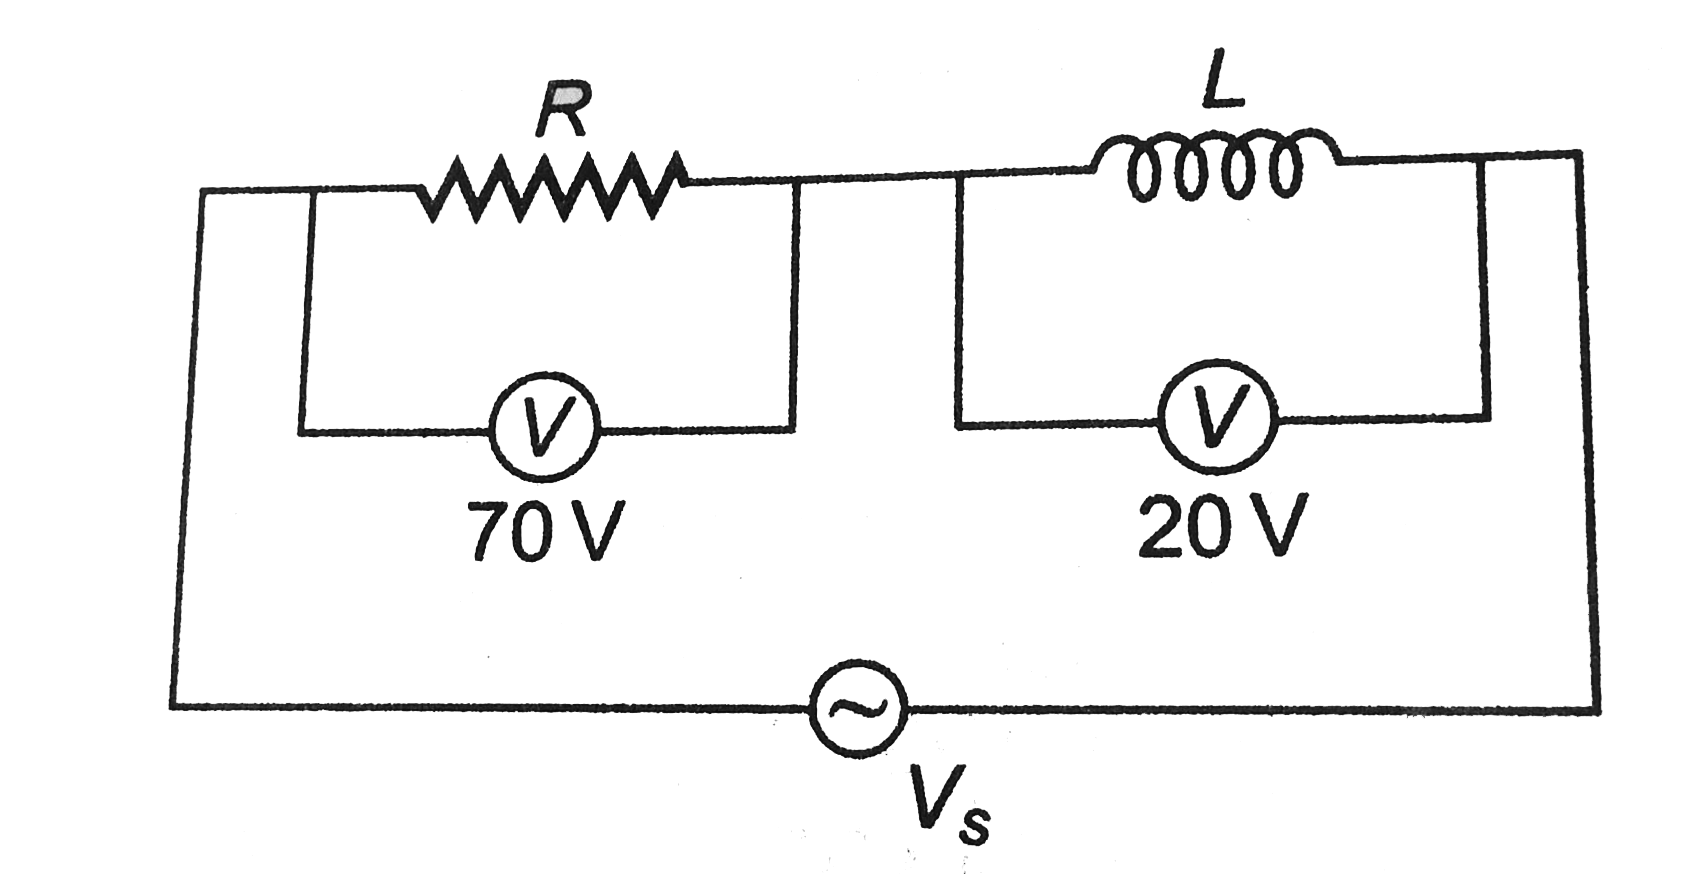 The adjoining figure shows an AC circuit with resistane R, inductance L and source voltage VS. Then